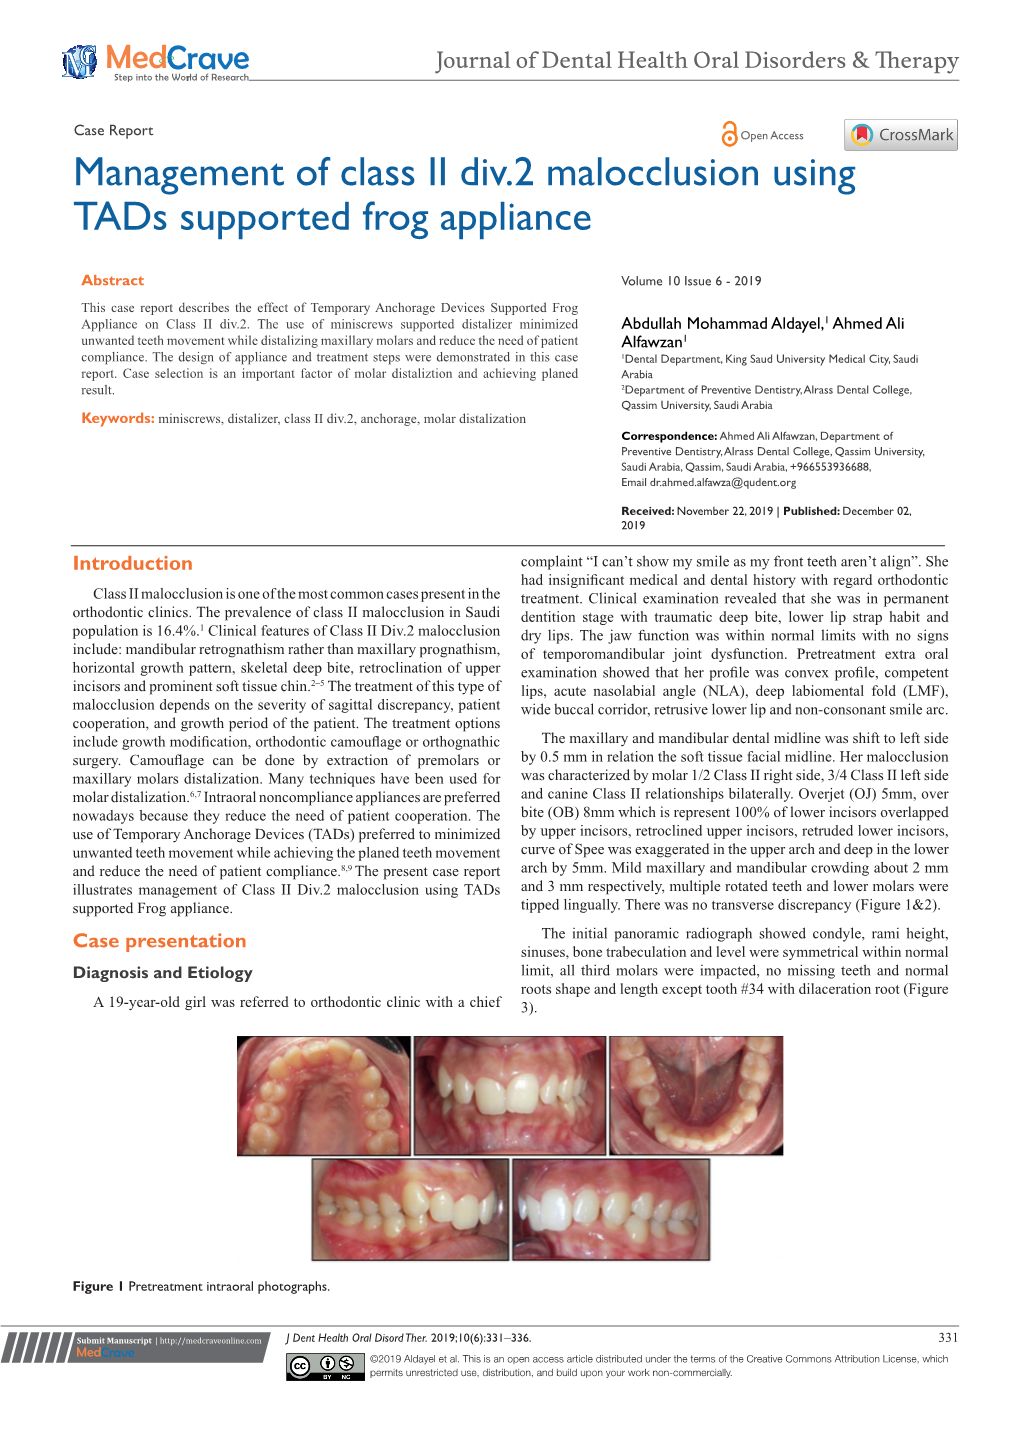 Management of Class II Div.2 Malocclusion Using Tads Supported Frog Appliance